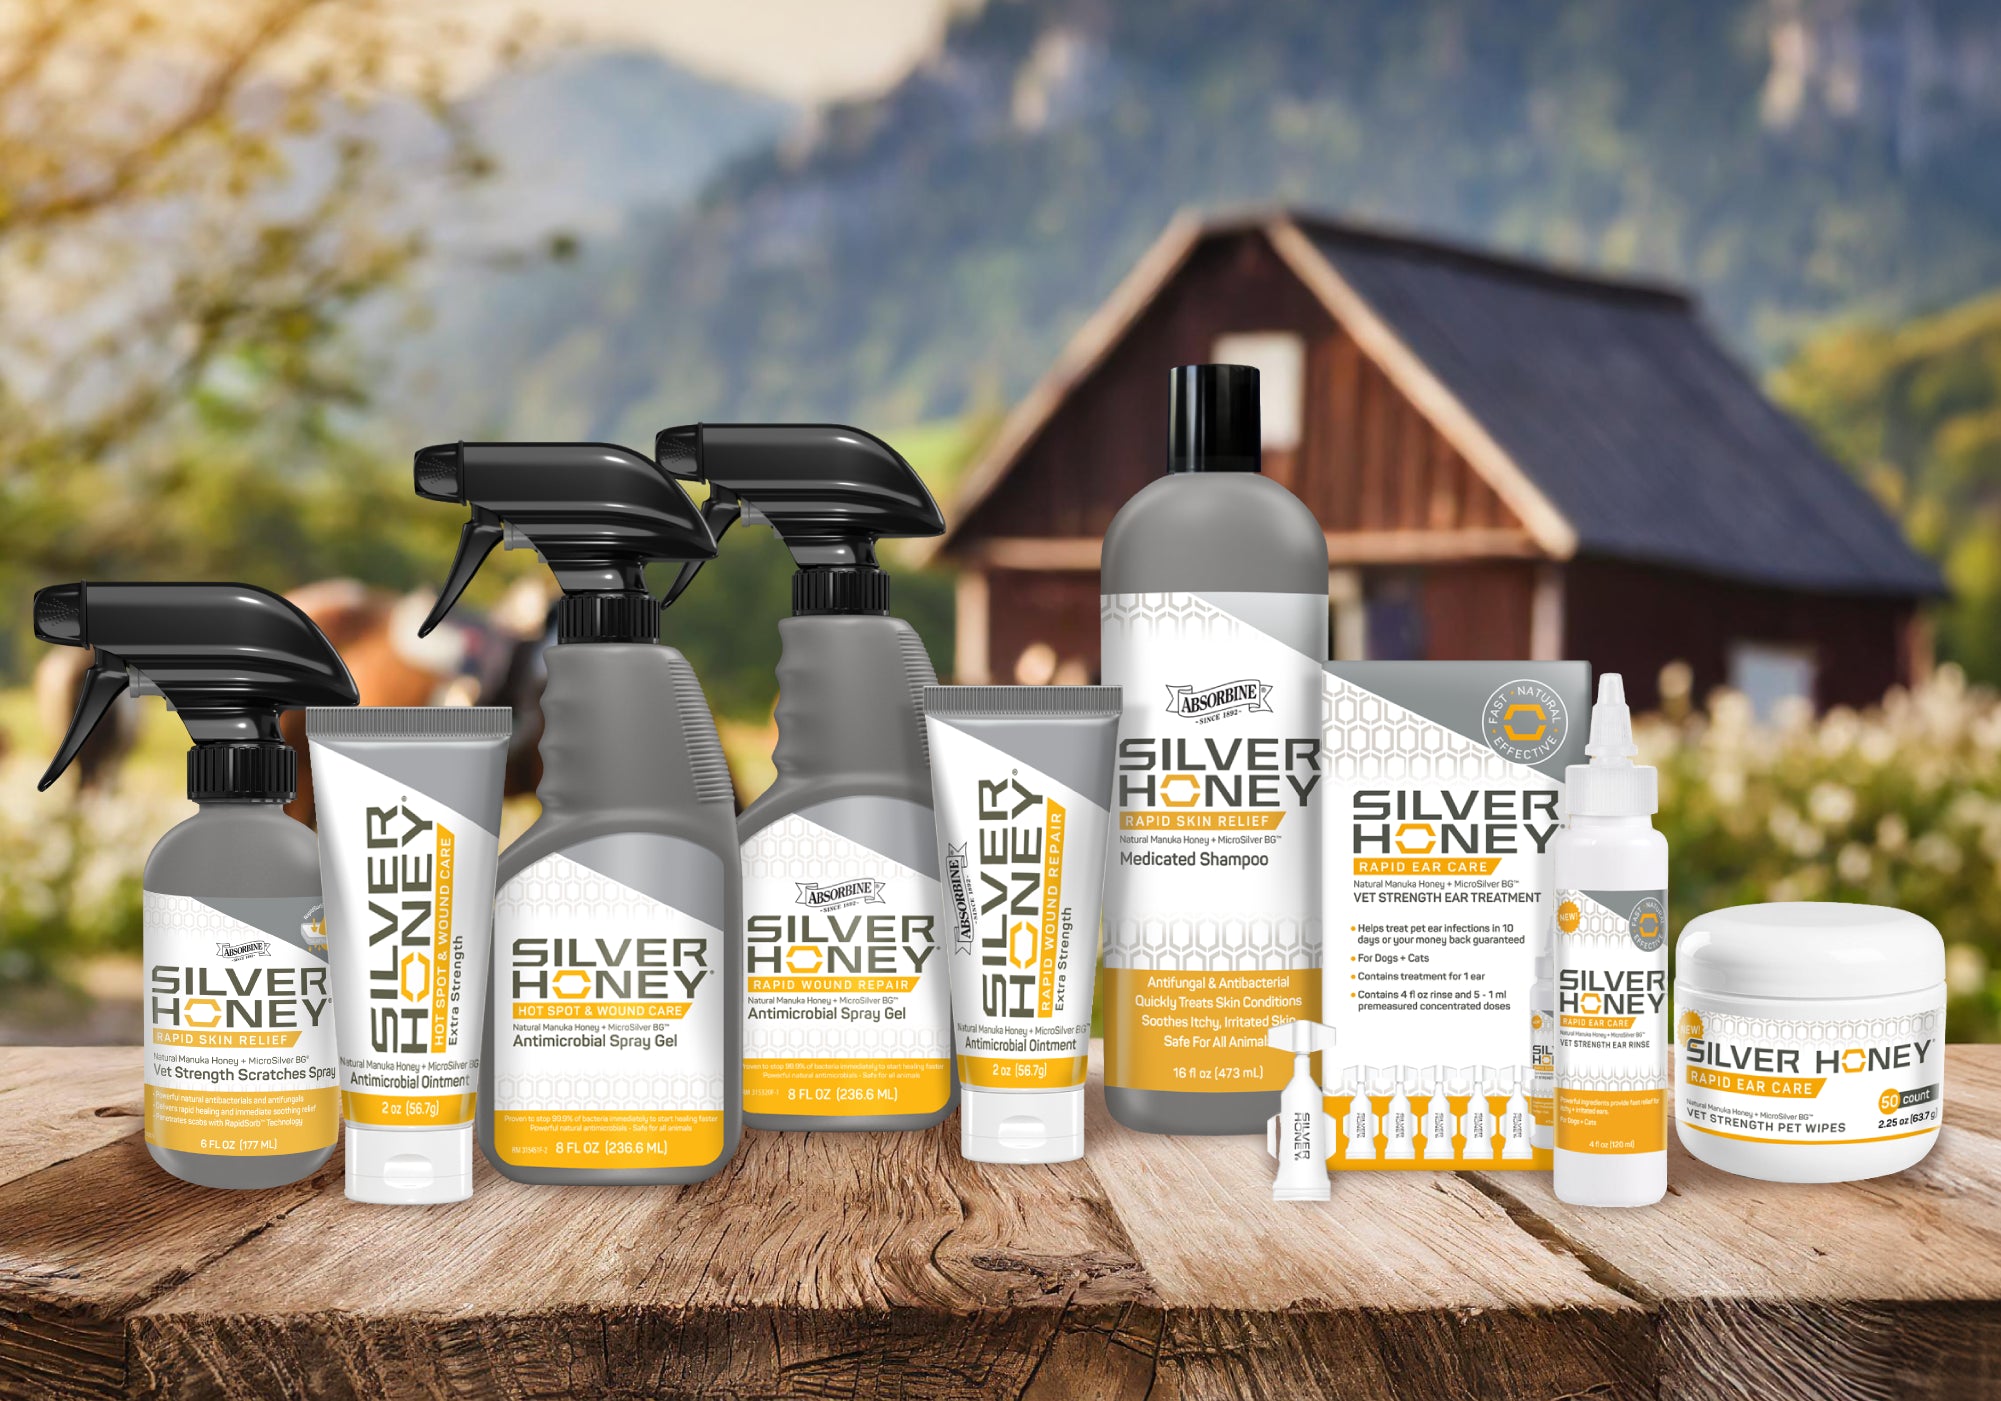 Our full line of Silver Honey products, from left to right: Scratches, ointment, hot spot spray gel, rapid wound repair gel, hot spot ointment, shampoo, Rapid ear care kit, ear rinse, and Silver Honey ear wipes.